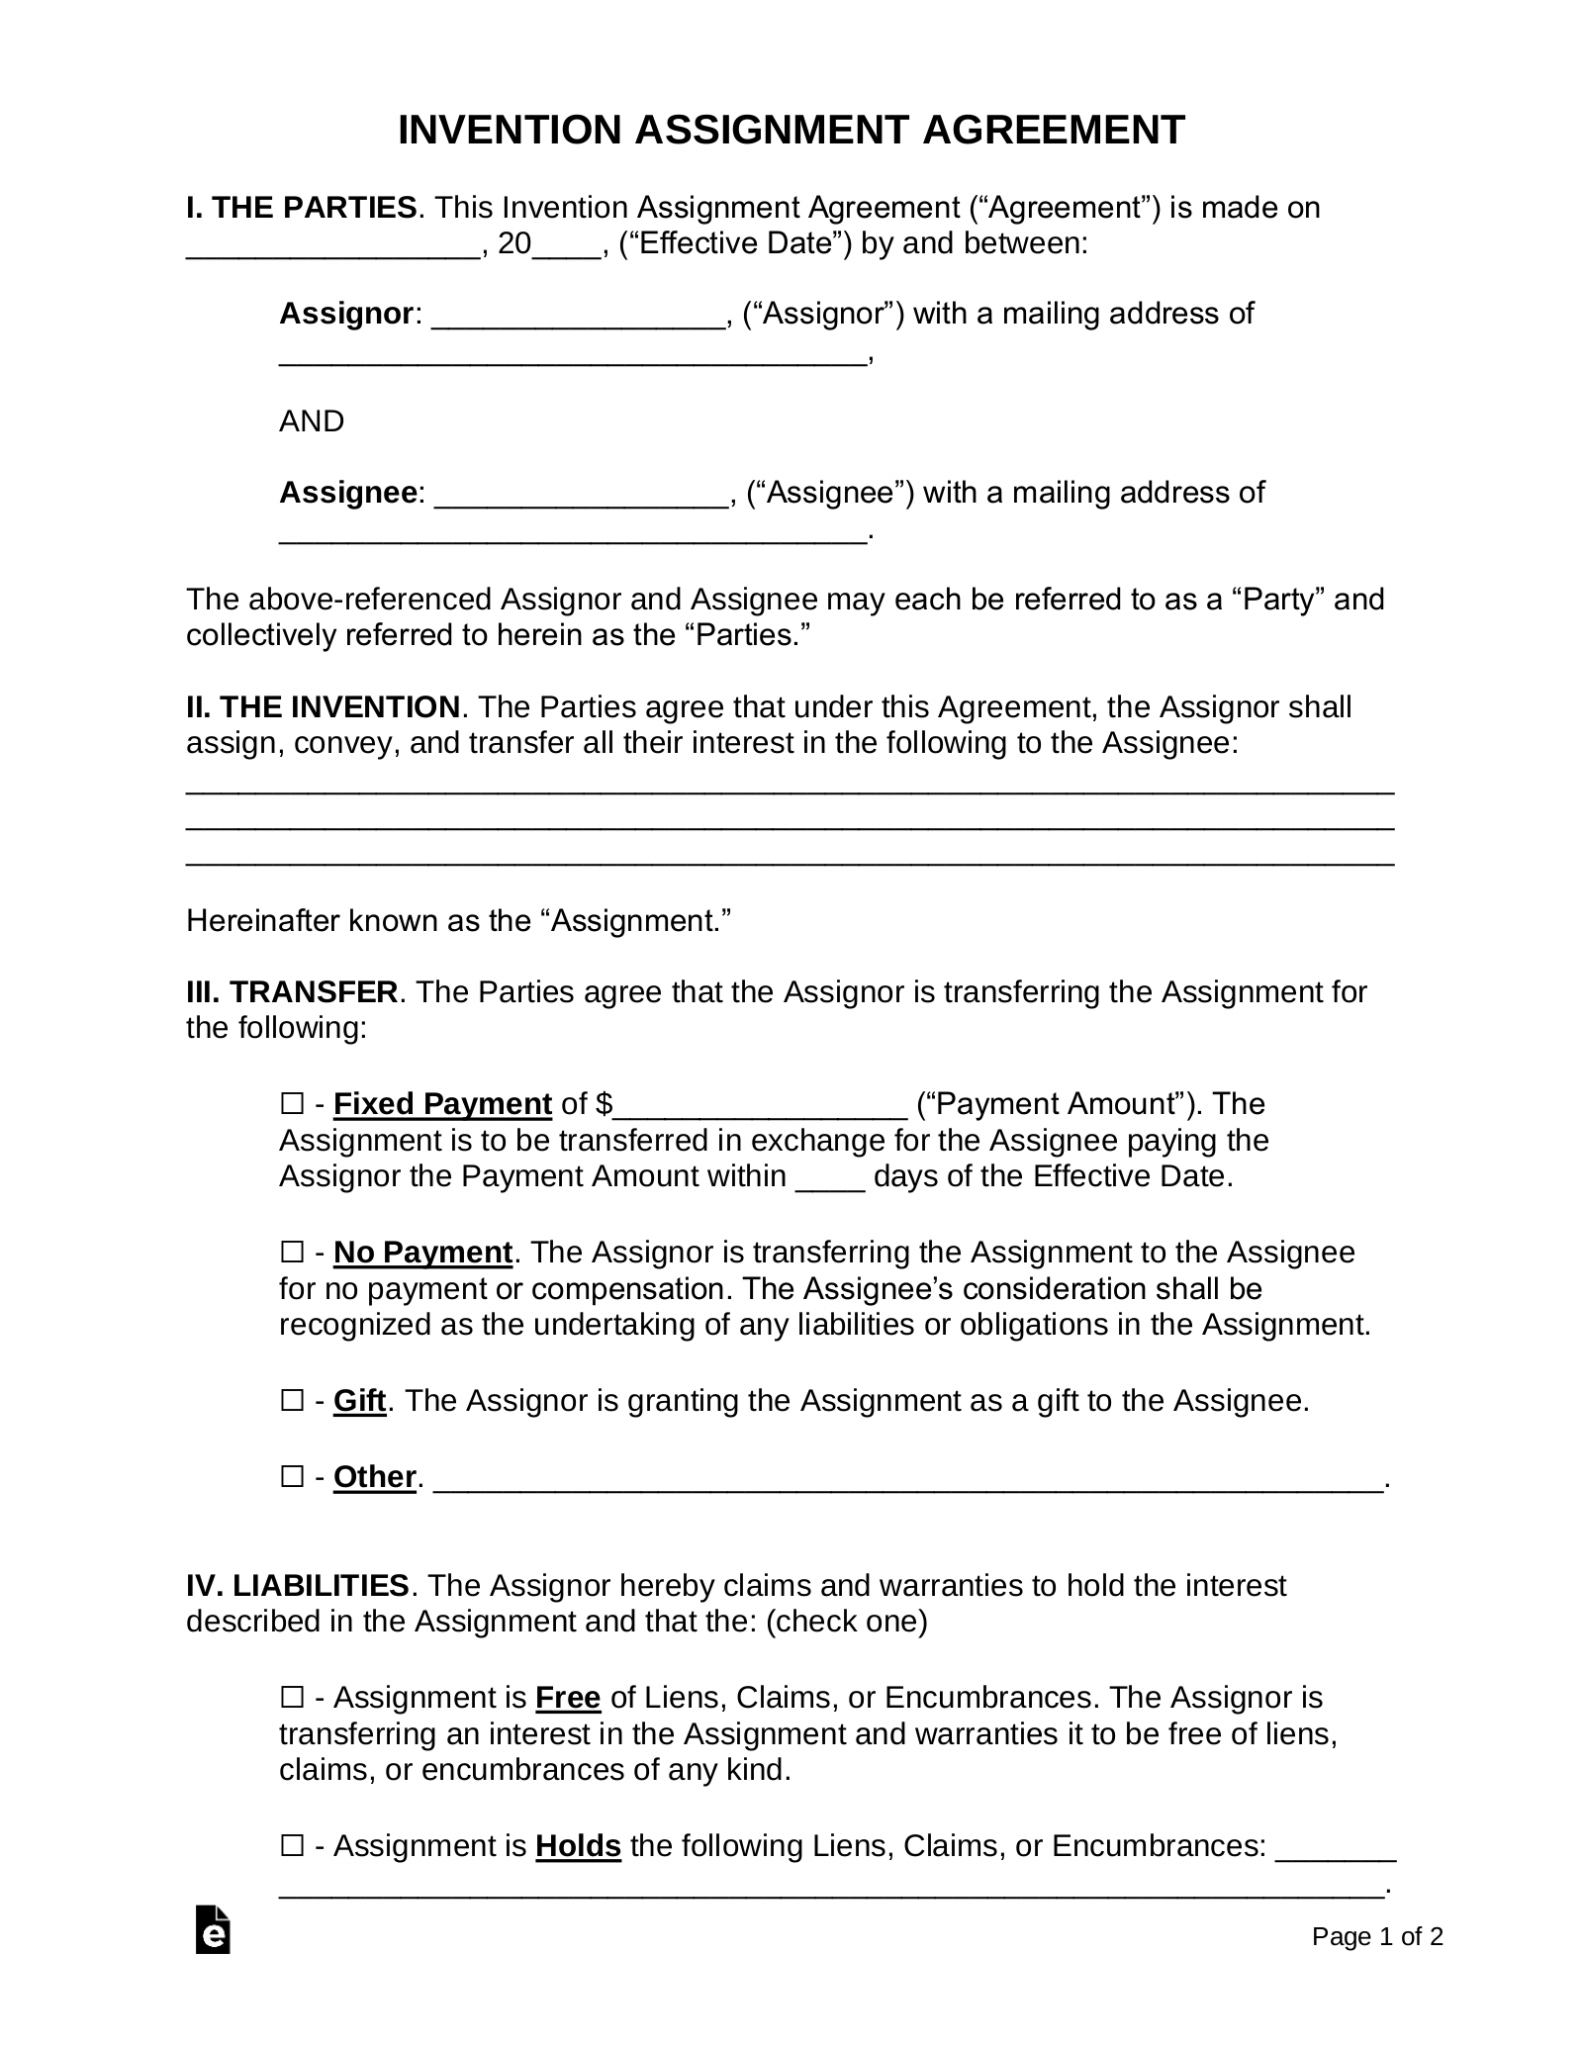 invention assignment agreement california